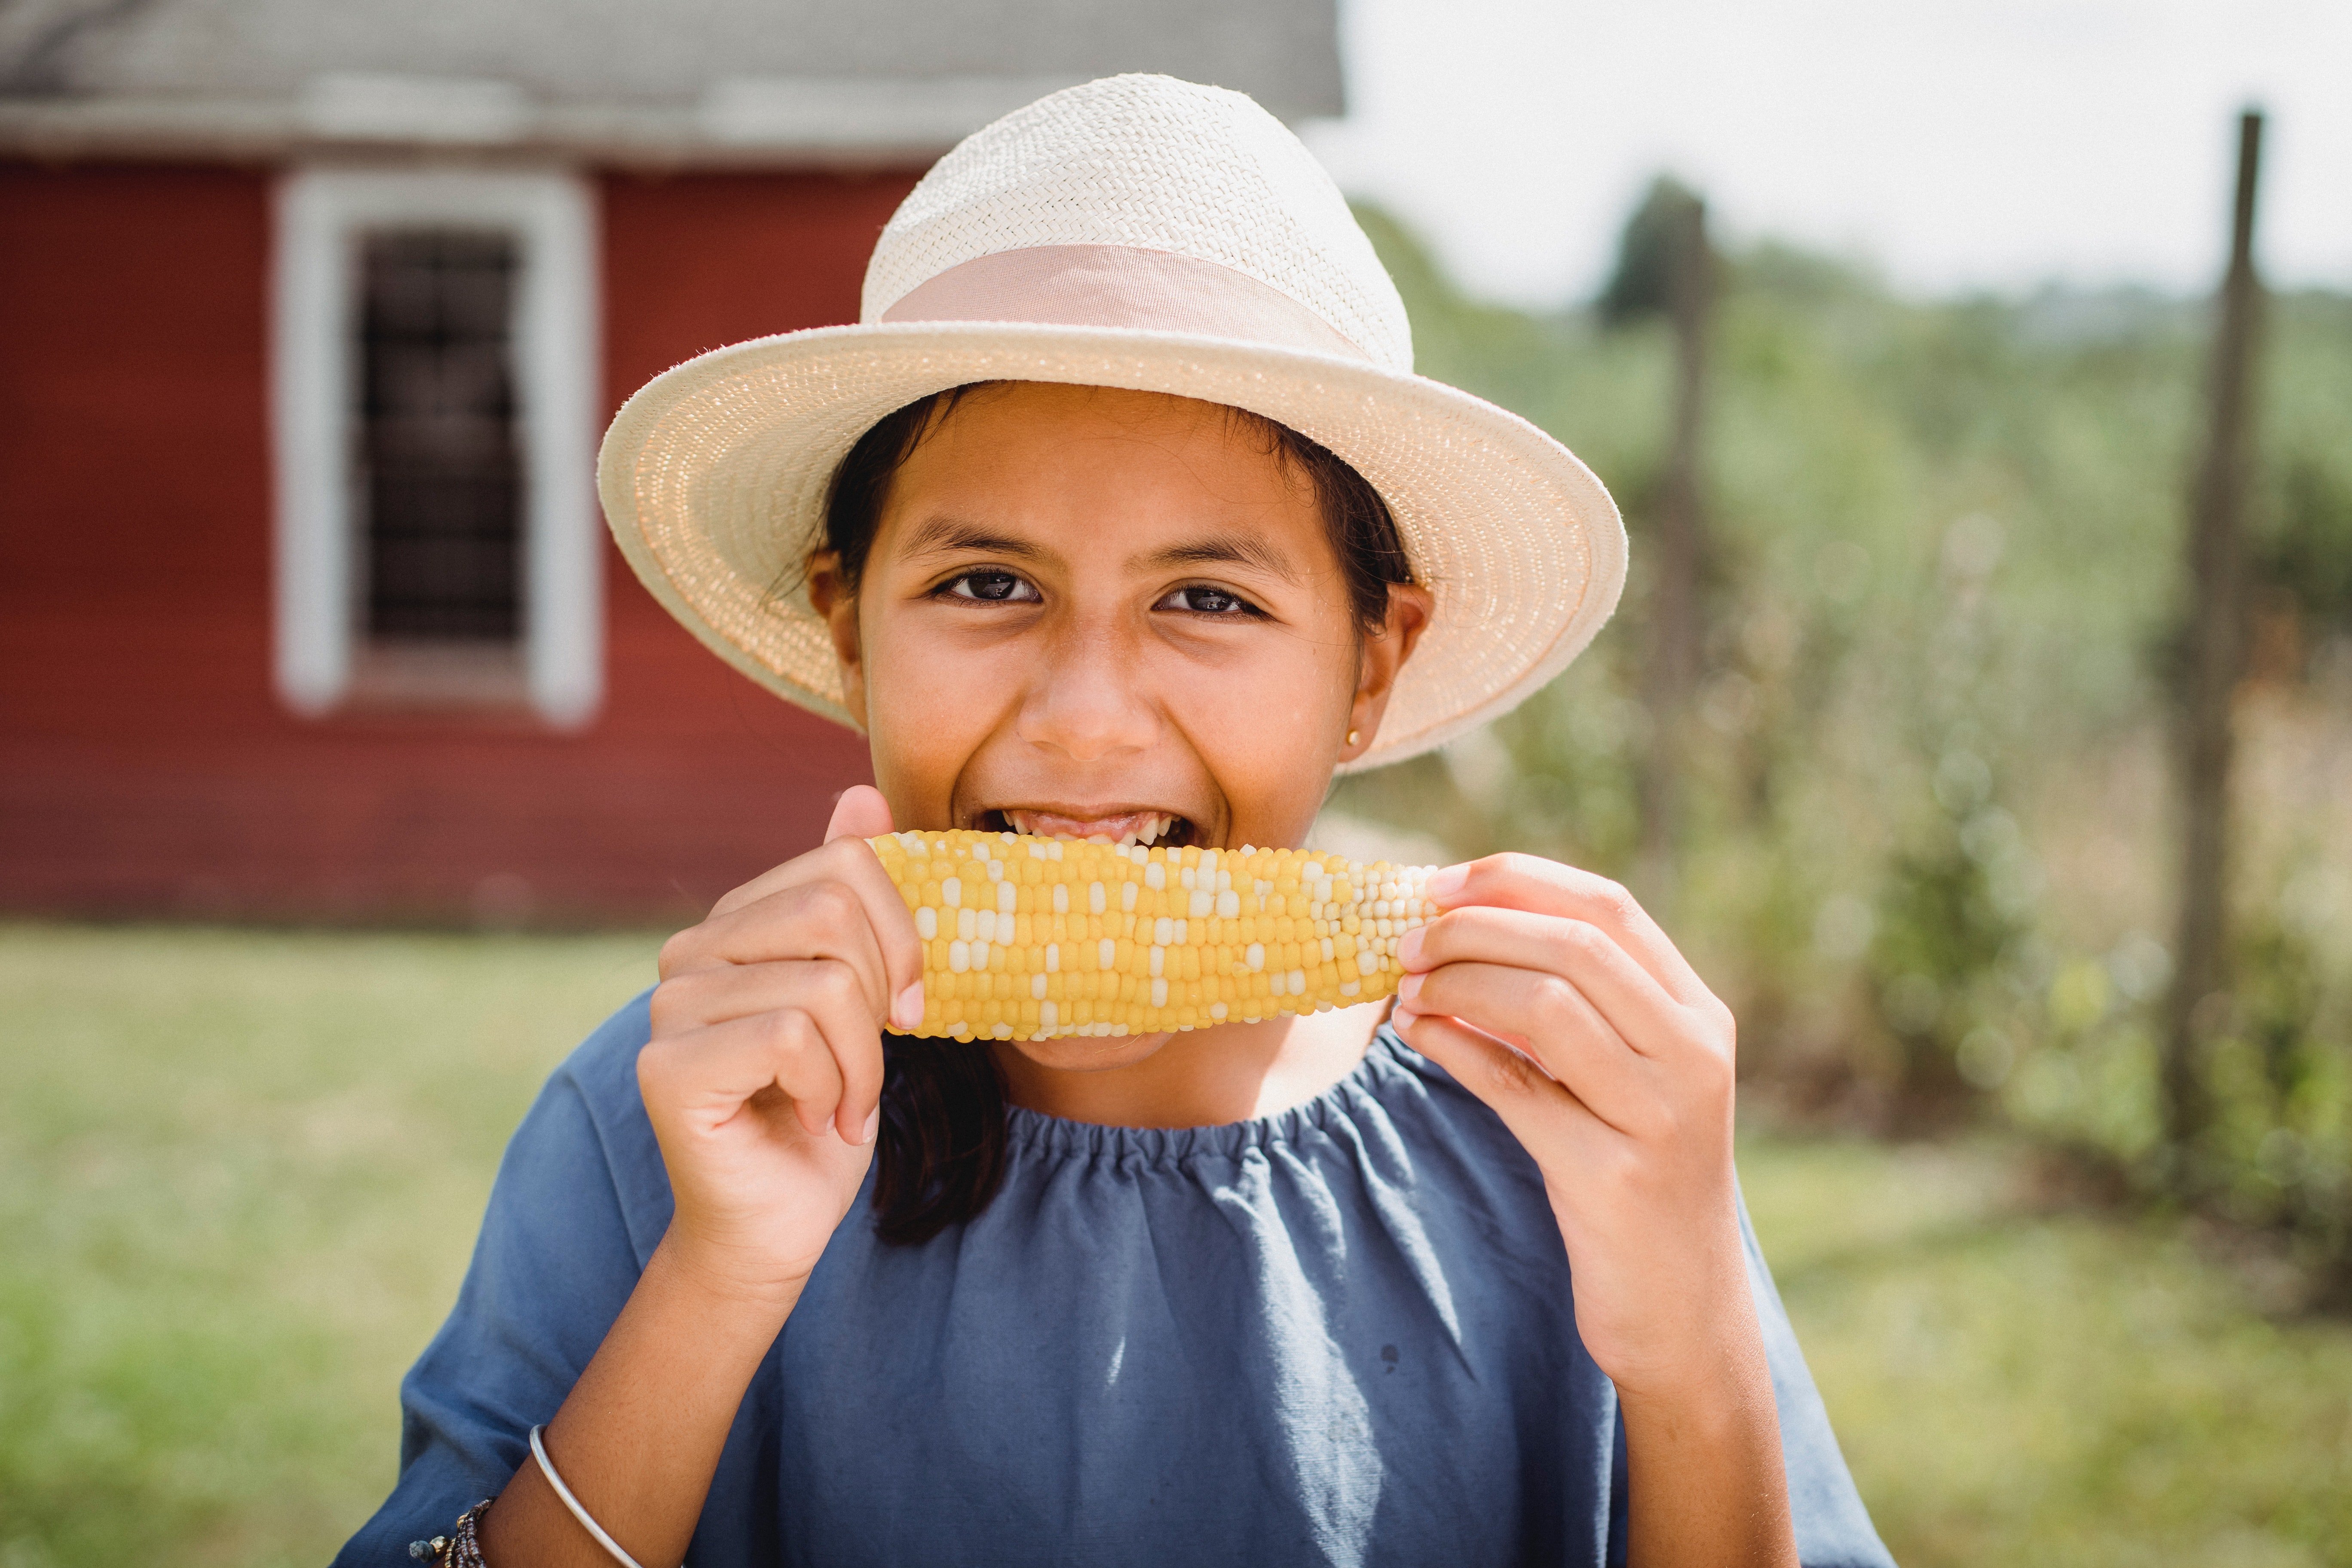 Pictured - A smiling young girl eating corn in the countryside wearing a blue top and a pink hat | Source: Pexels 